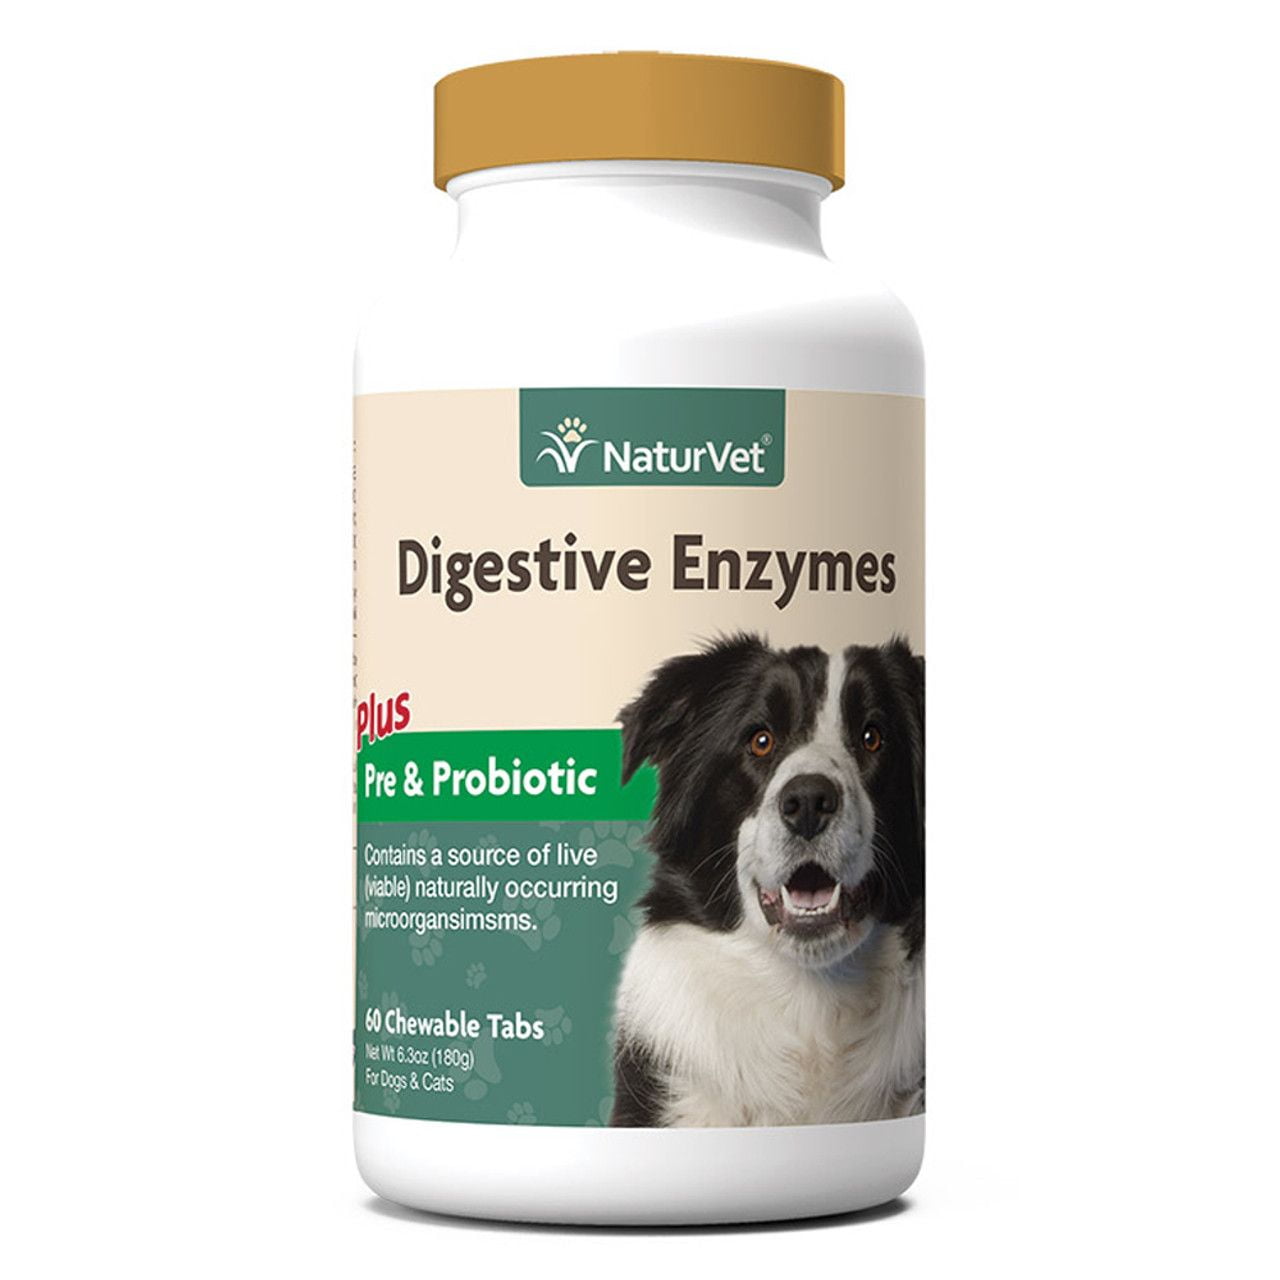 NaturVet Digestive Enzyme Chewable Tablets with Probiotics for Dogs & Cats